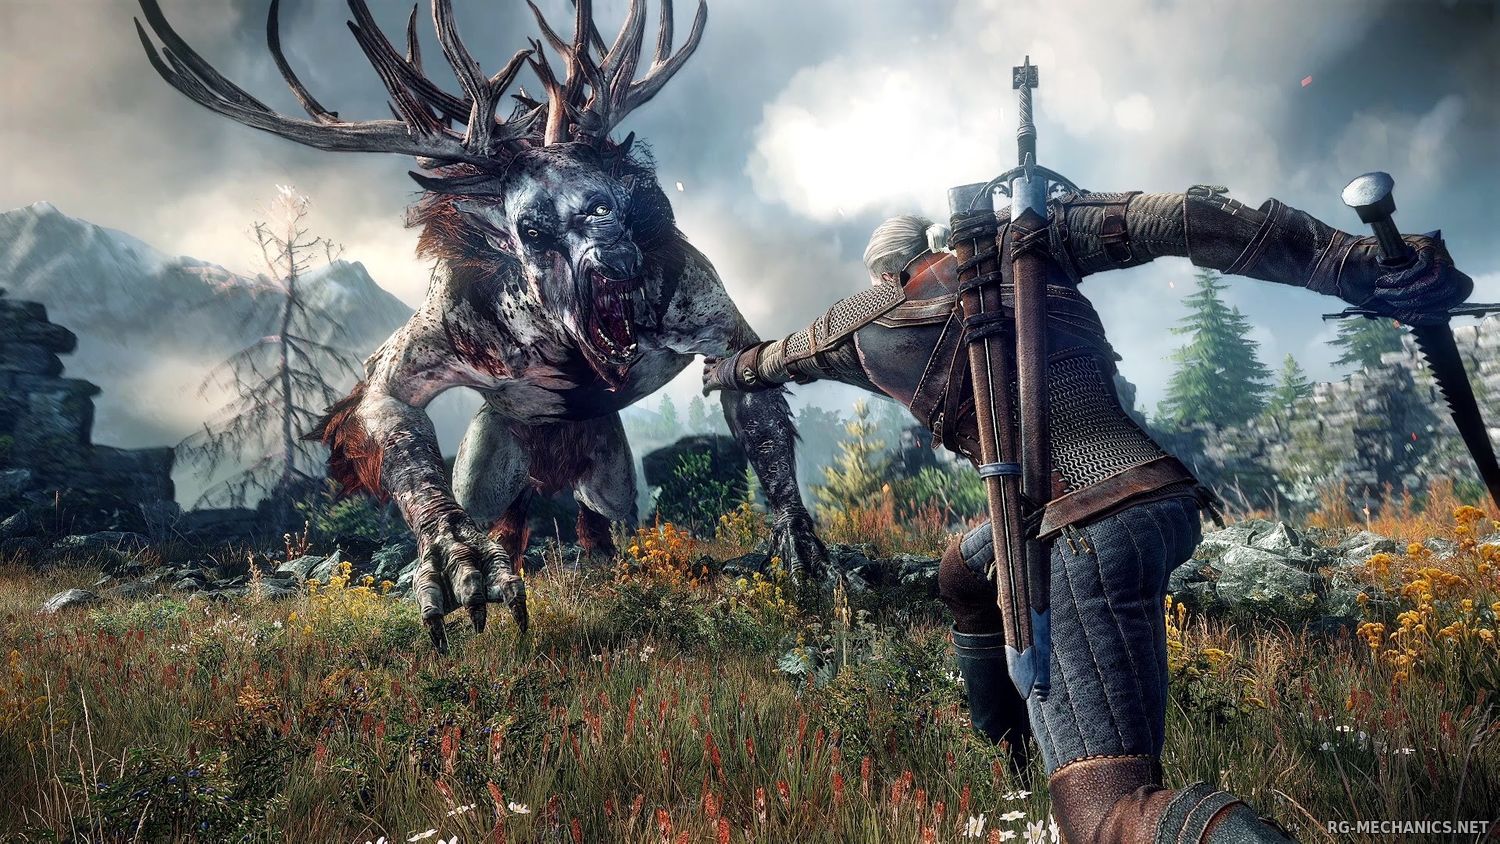 Скриншот 1 к игре The Witcher 3: Wild Hunt + The Witcher 3 HD Reworked Project (mod v. 12.0) (2015) скачать торрент RePack